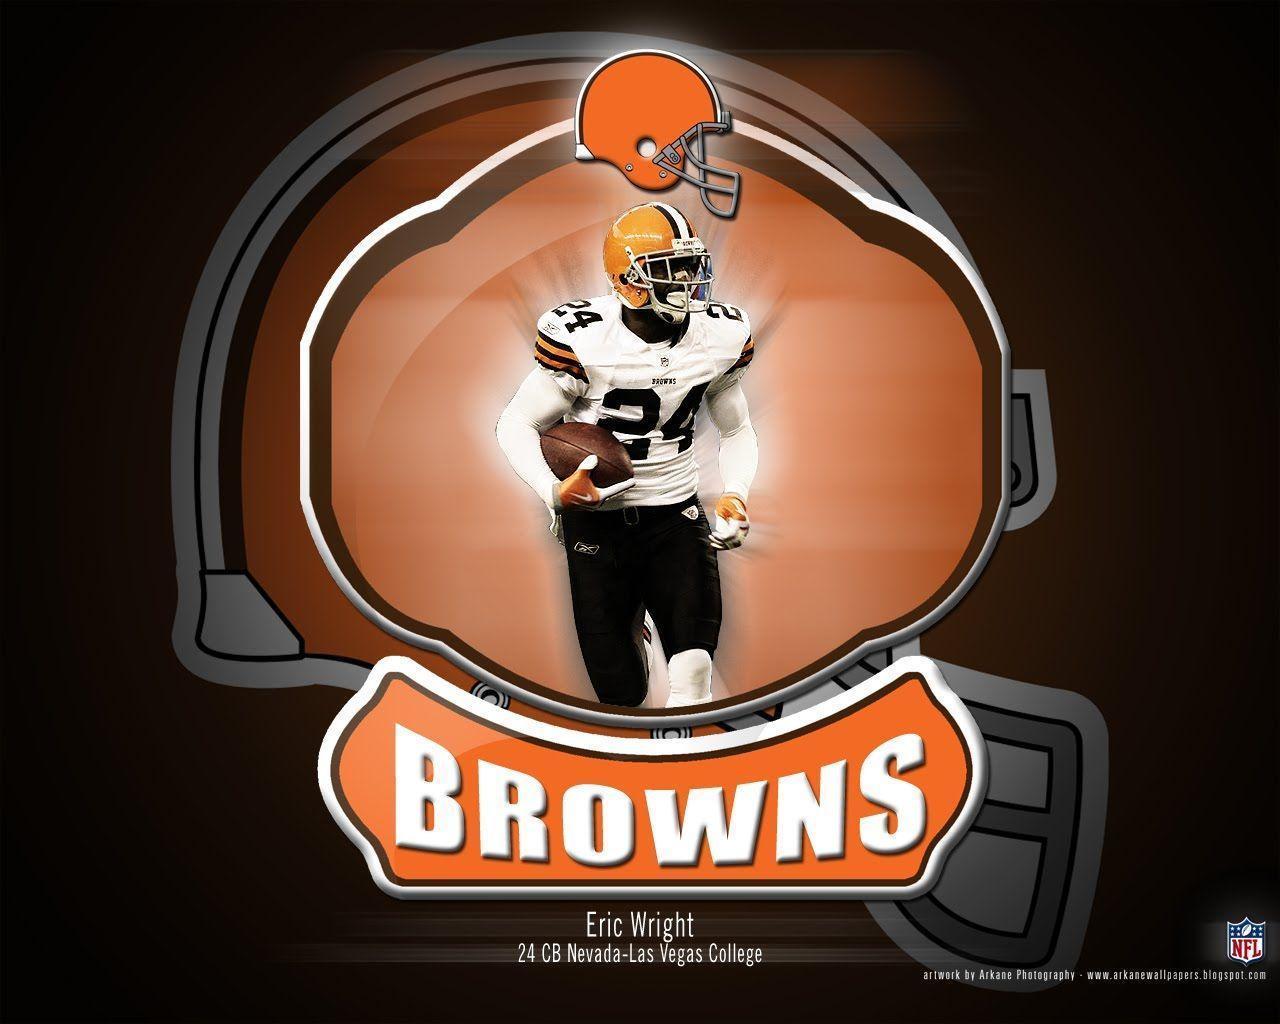 Cleveland Browns Superstar: Eric Wright taken from Cleveland